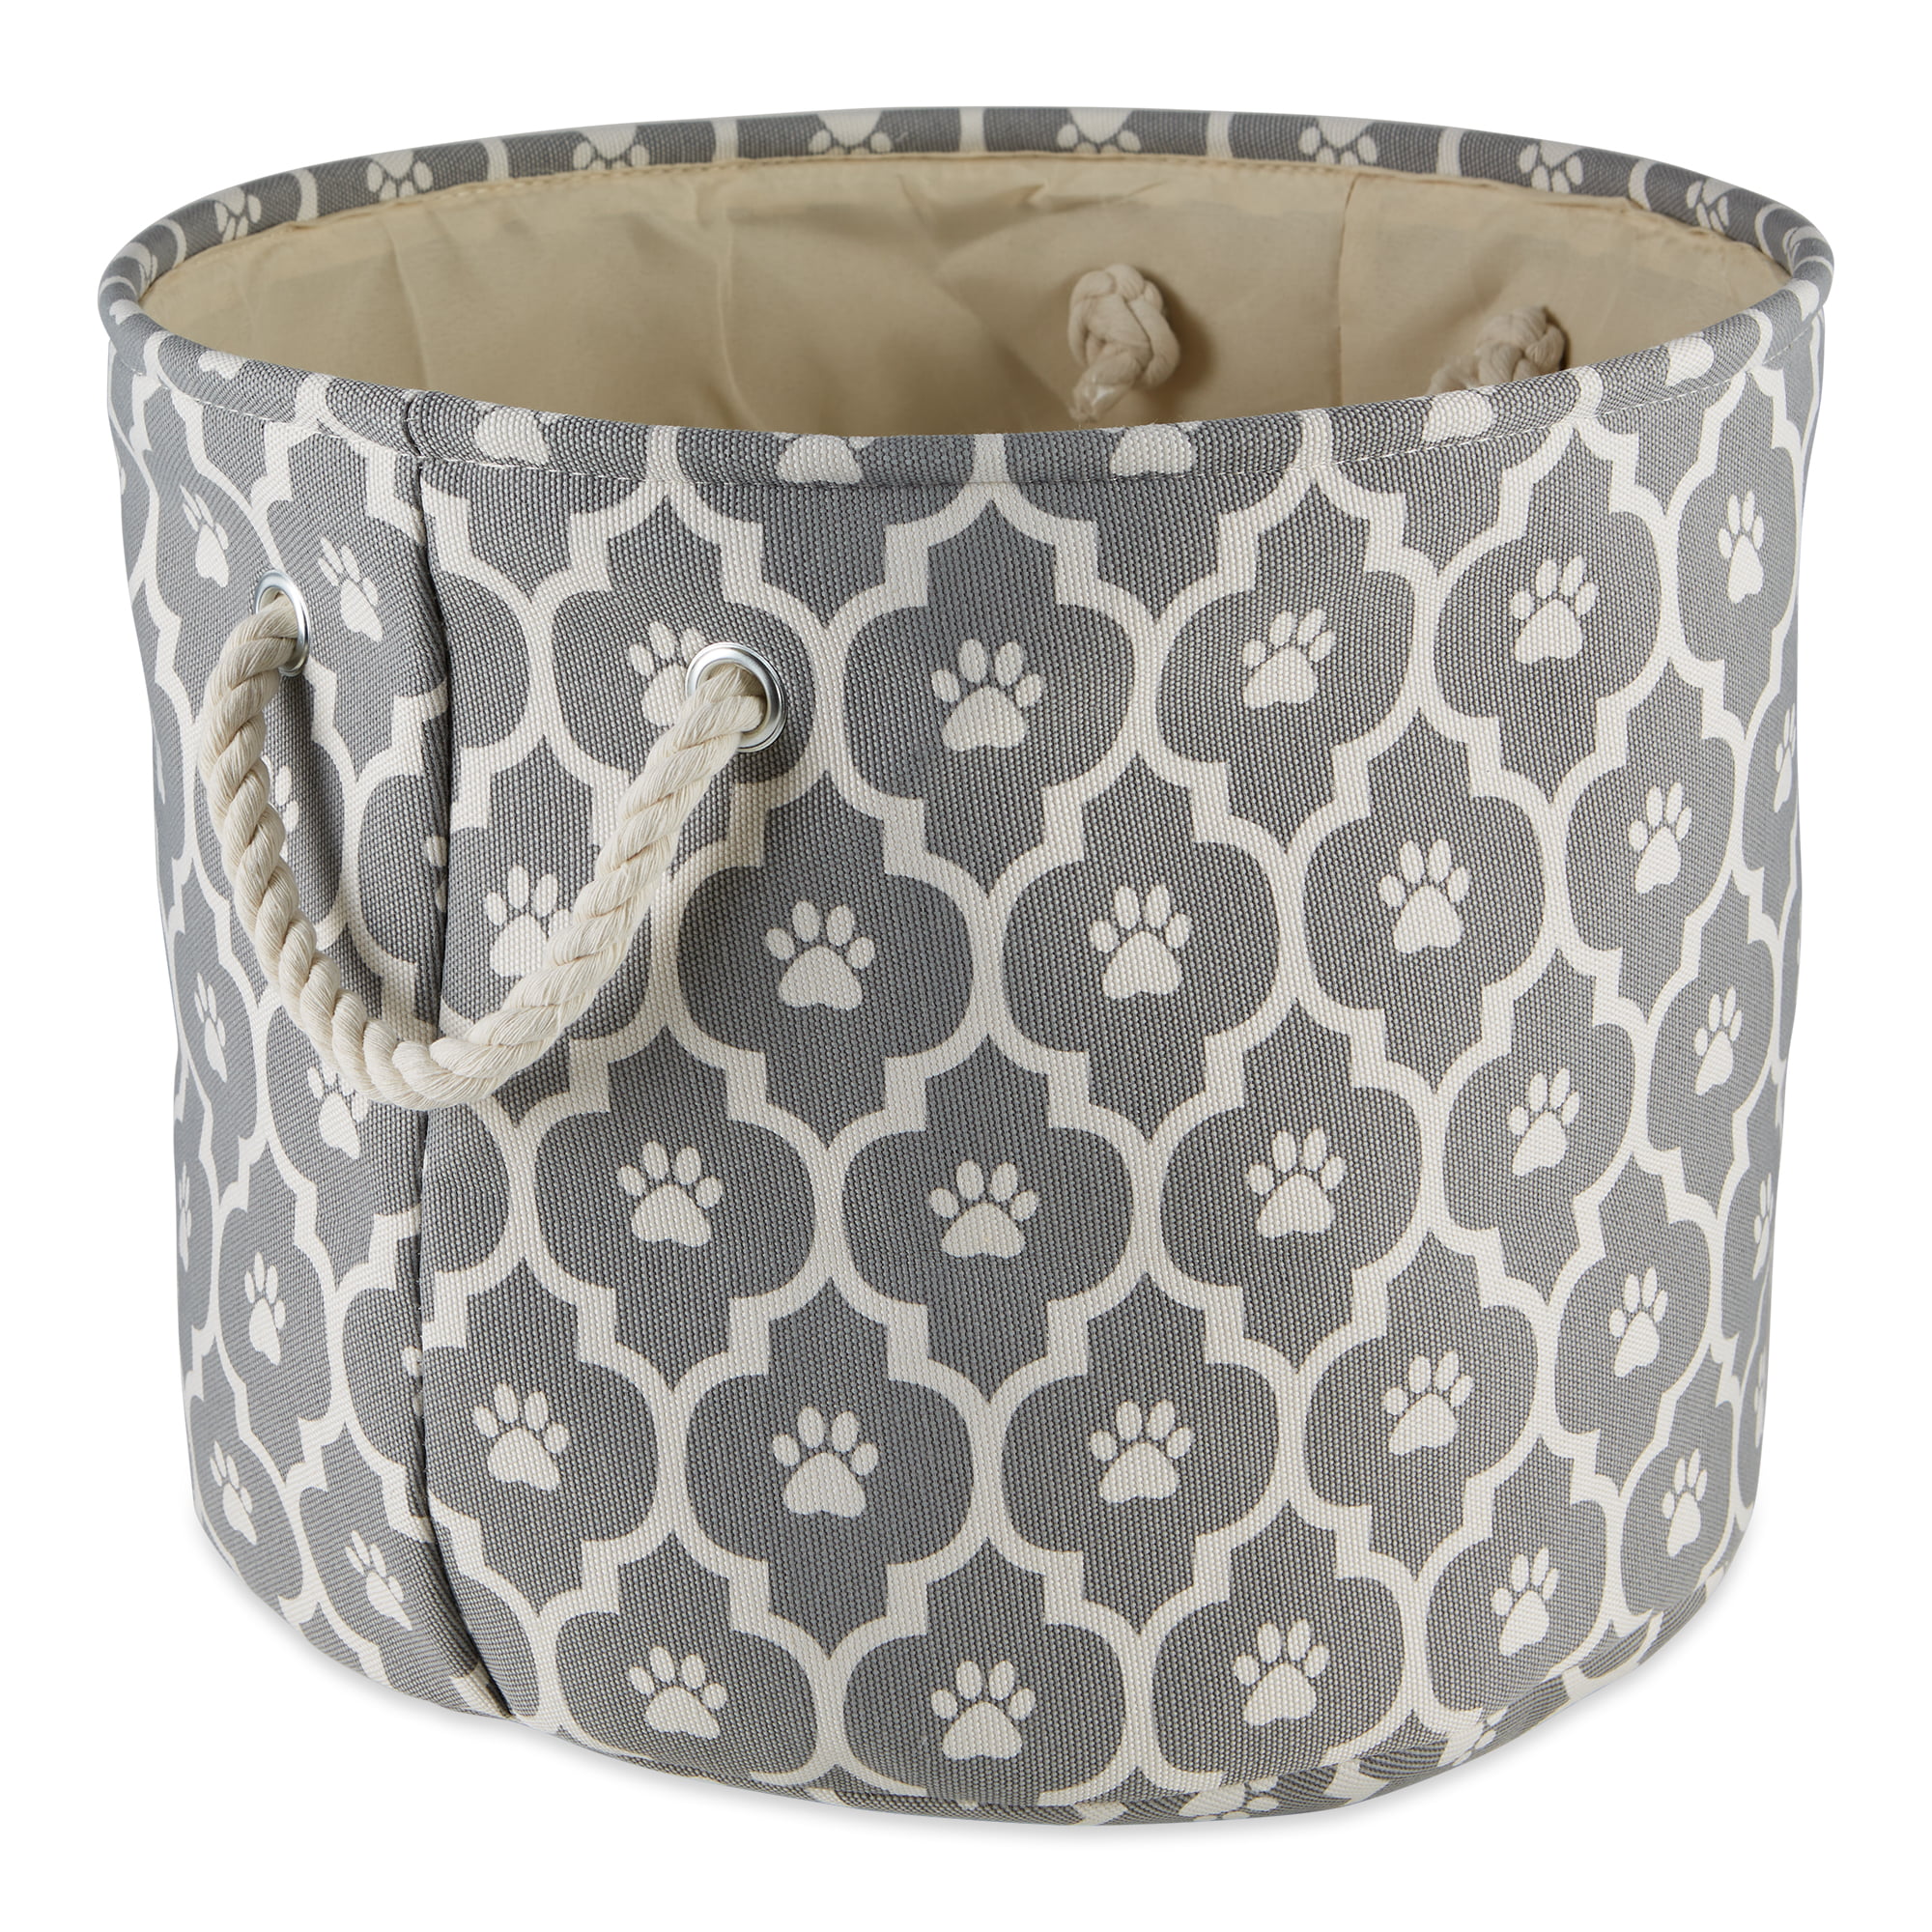 Picture of Design Imports CAMZ12514 Lattice Paw Round Polyester Pet Bin, Gray - Large